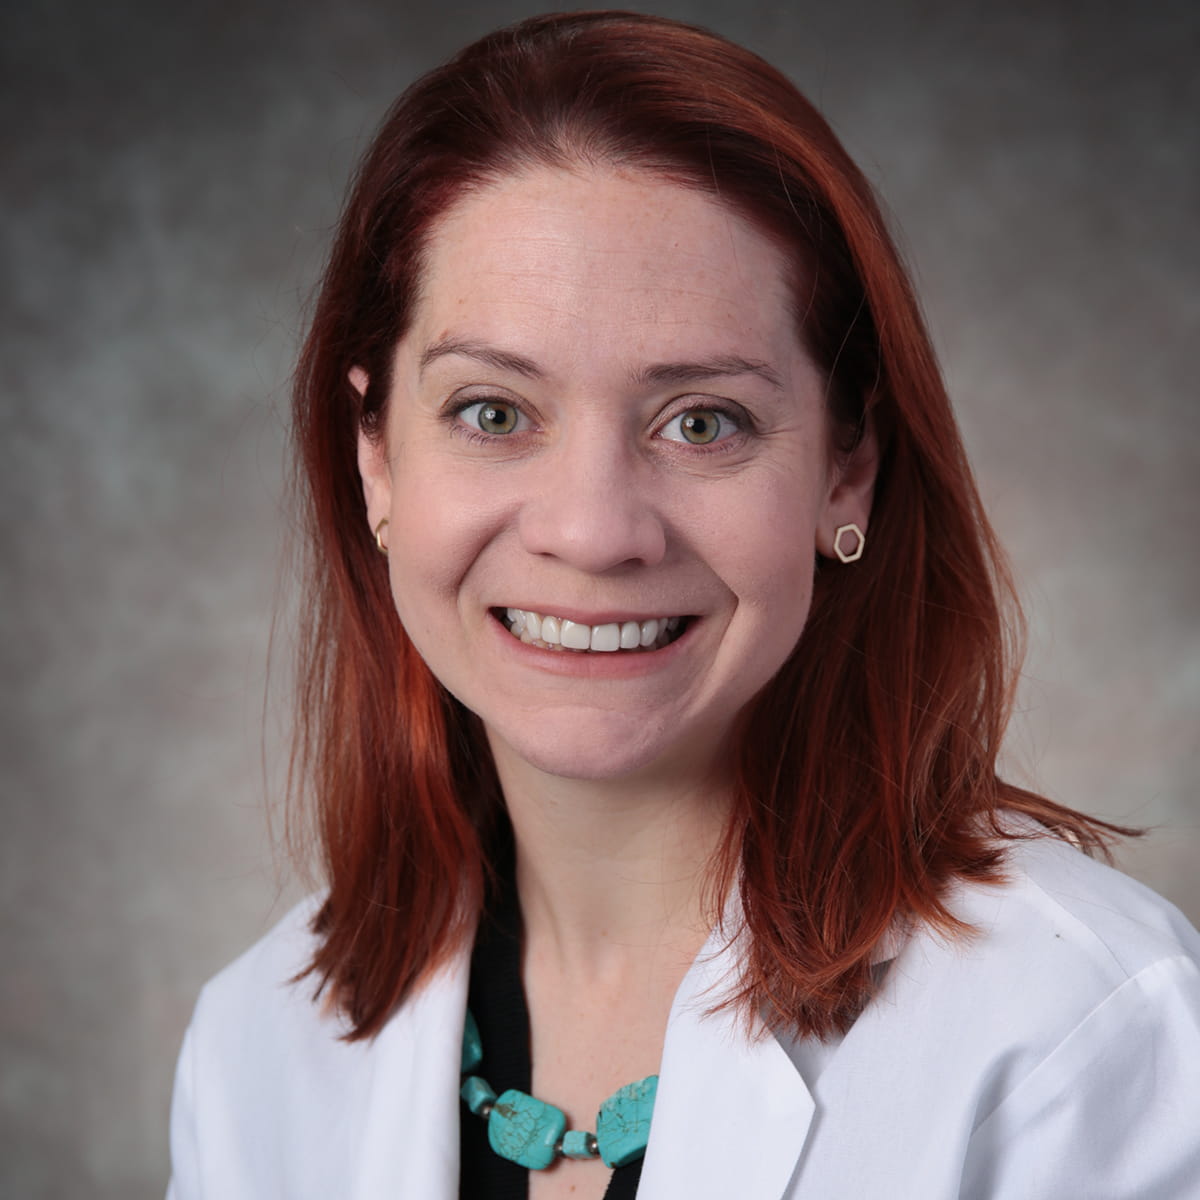 A friendly headshot of Stacey O'Brien, MD